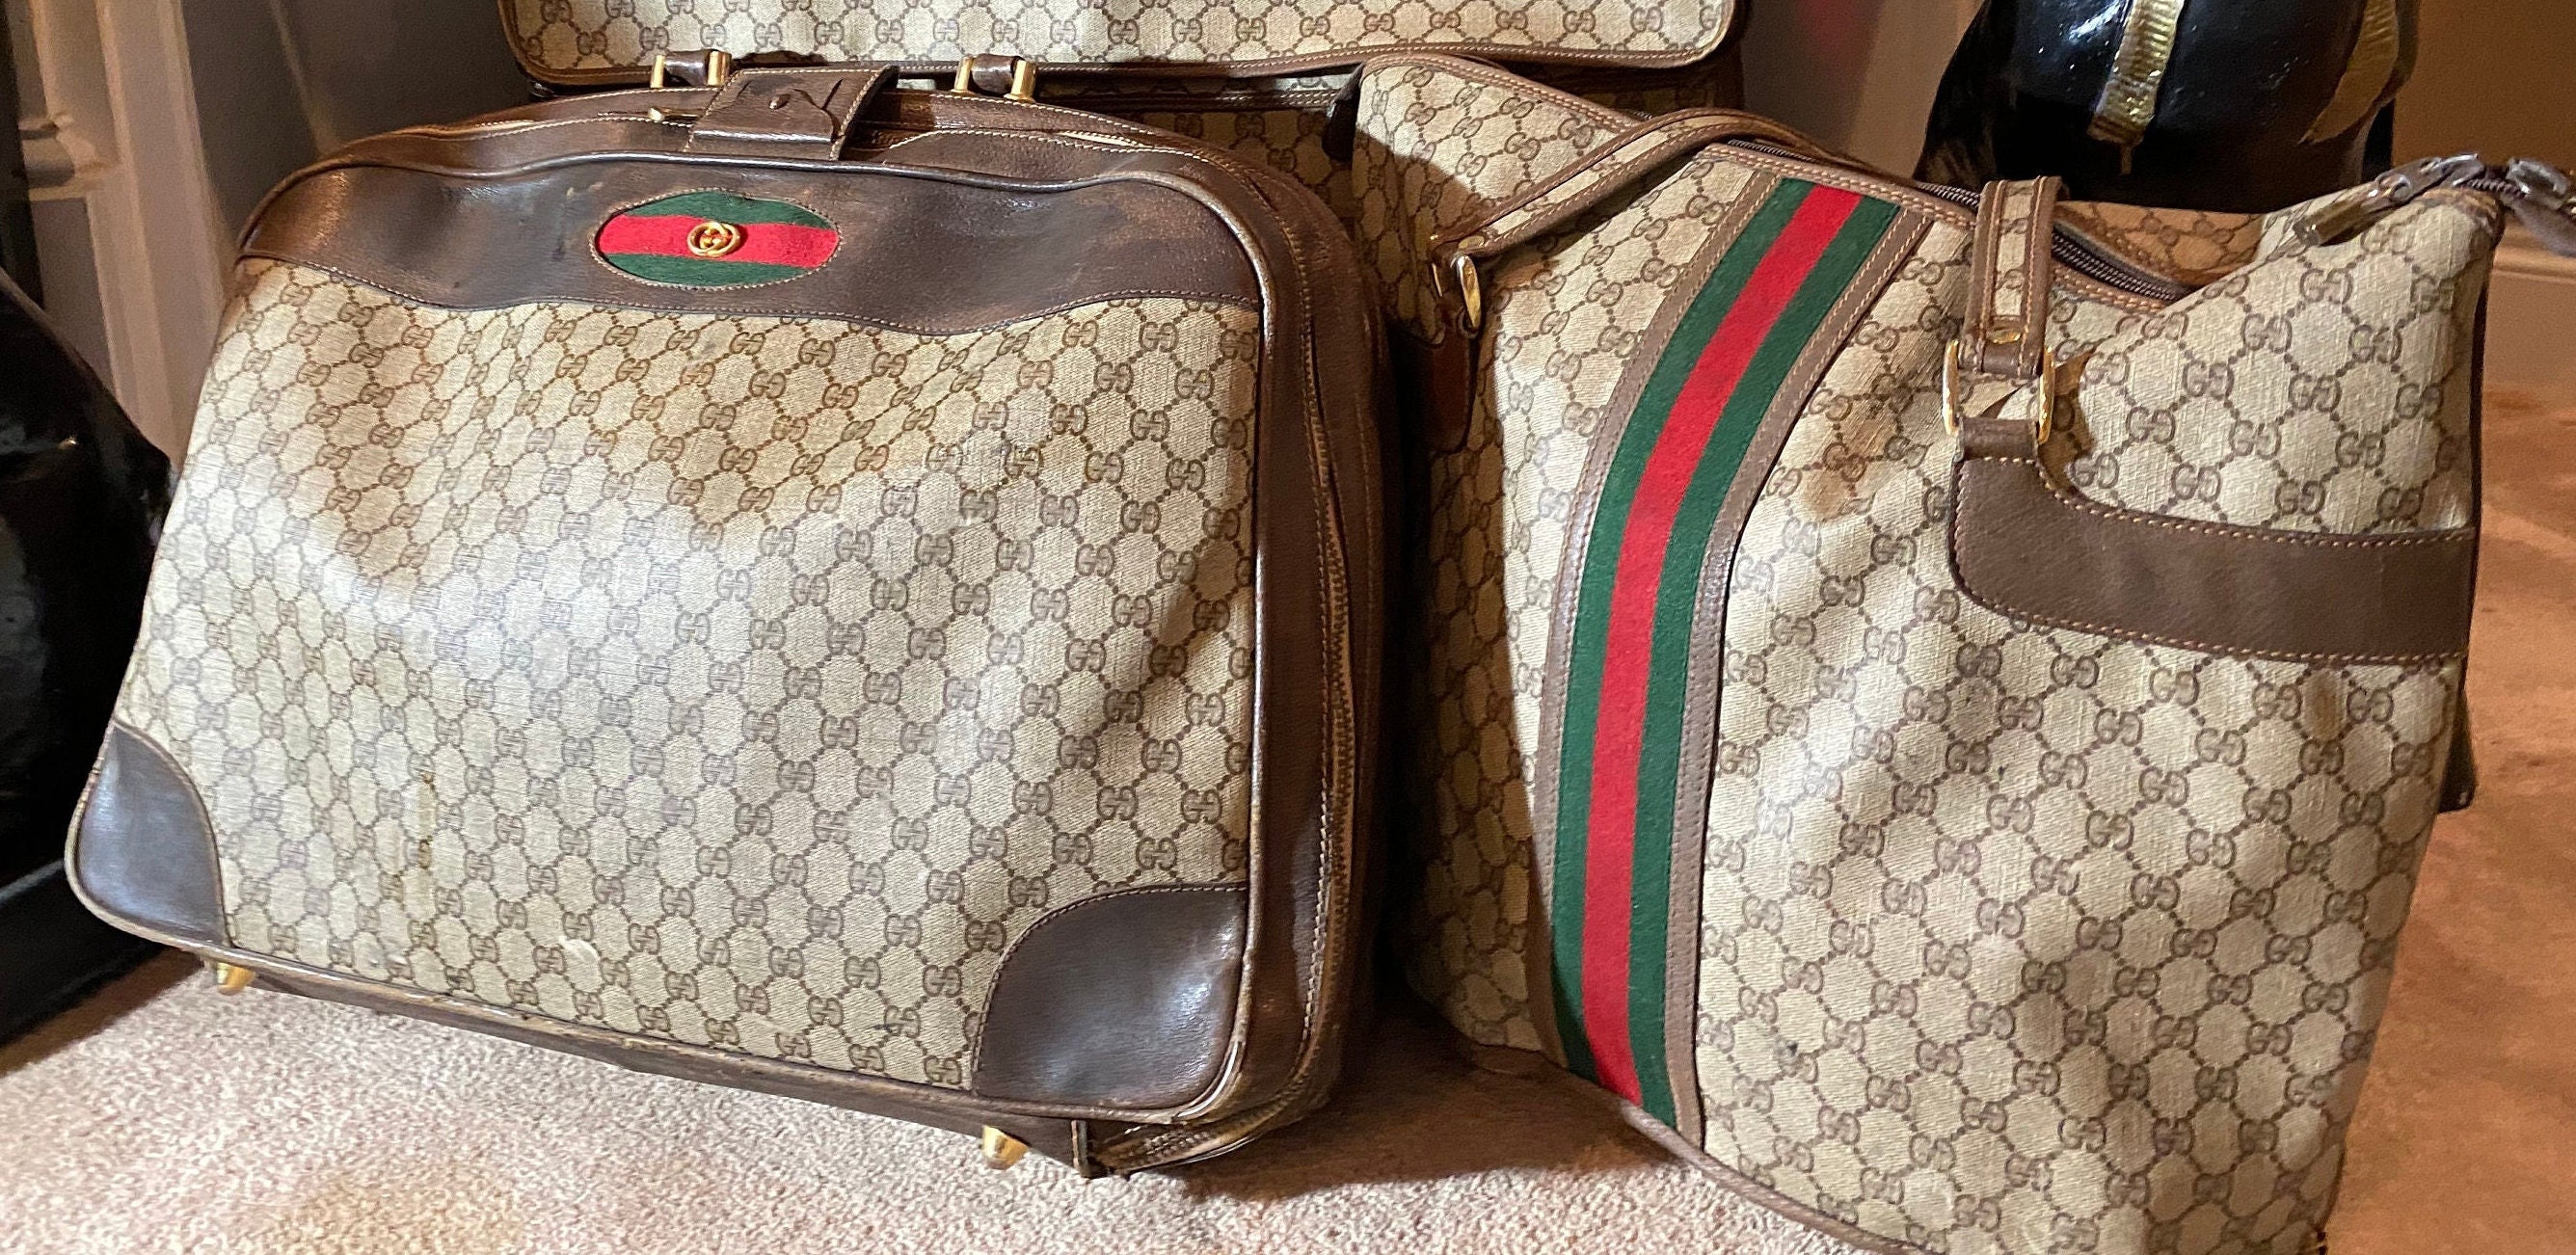 Gucci 2 Piece Luggage Set Overnight Soft Suitcase and Carryon. 